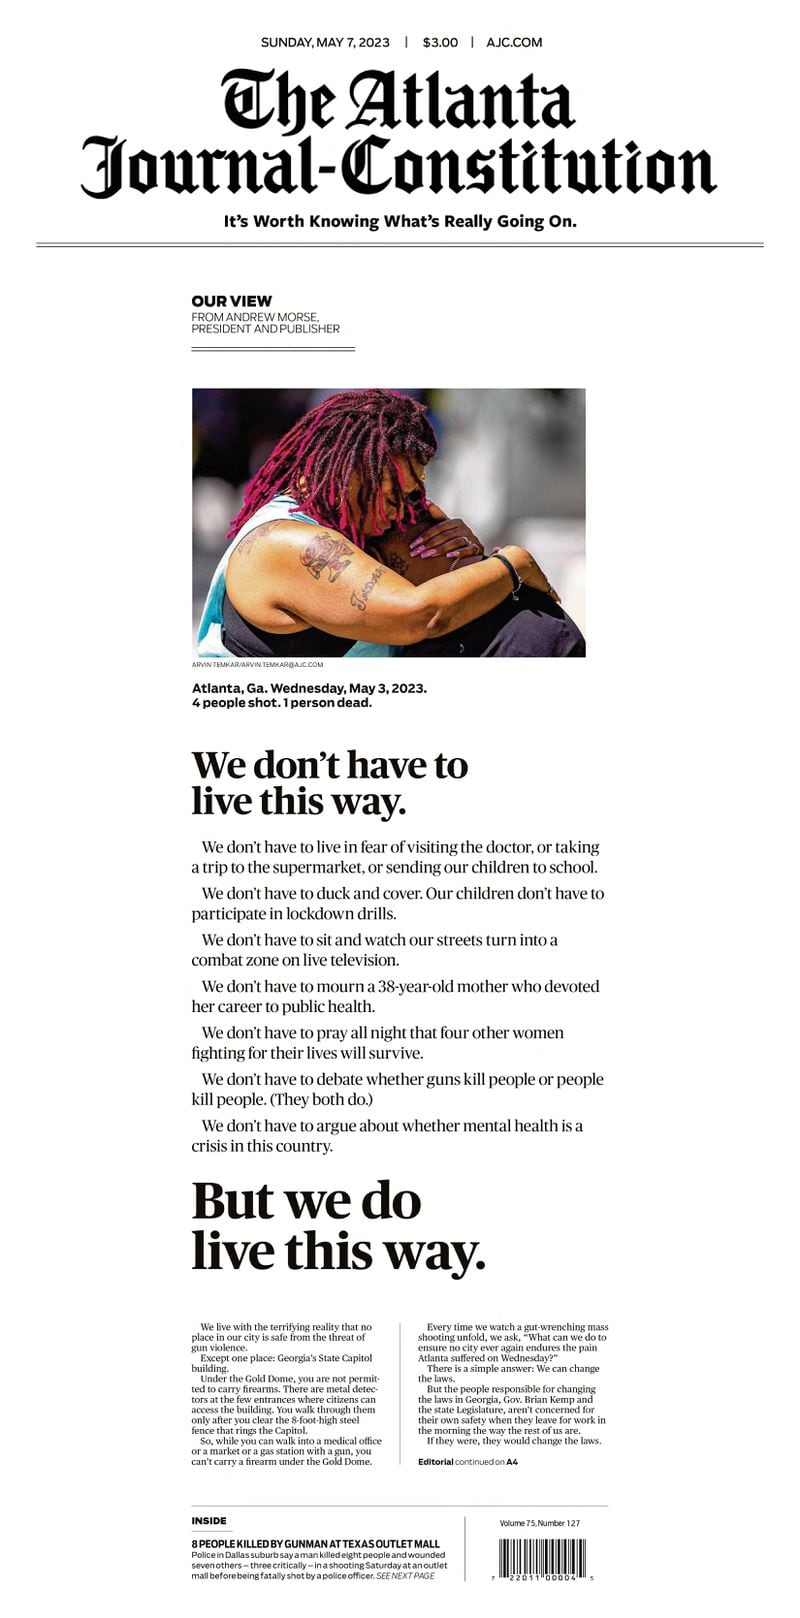 The front page of the Sunday edition of The Atlanta Journal-Constitution, May 7, 2023.